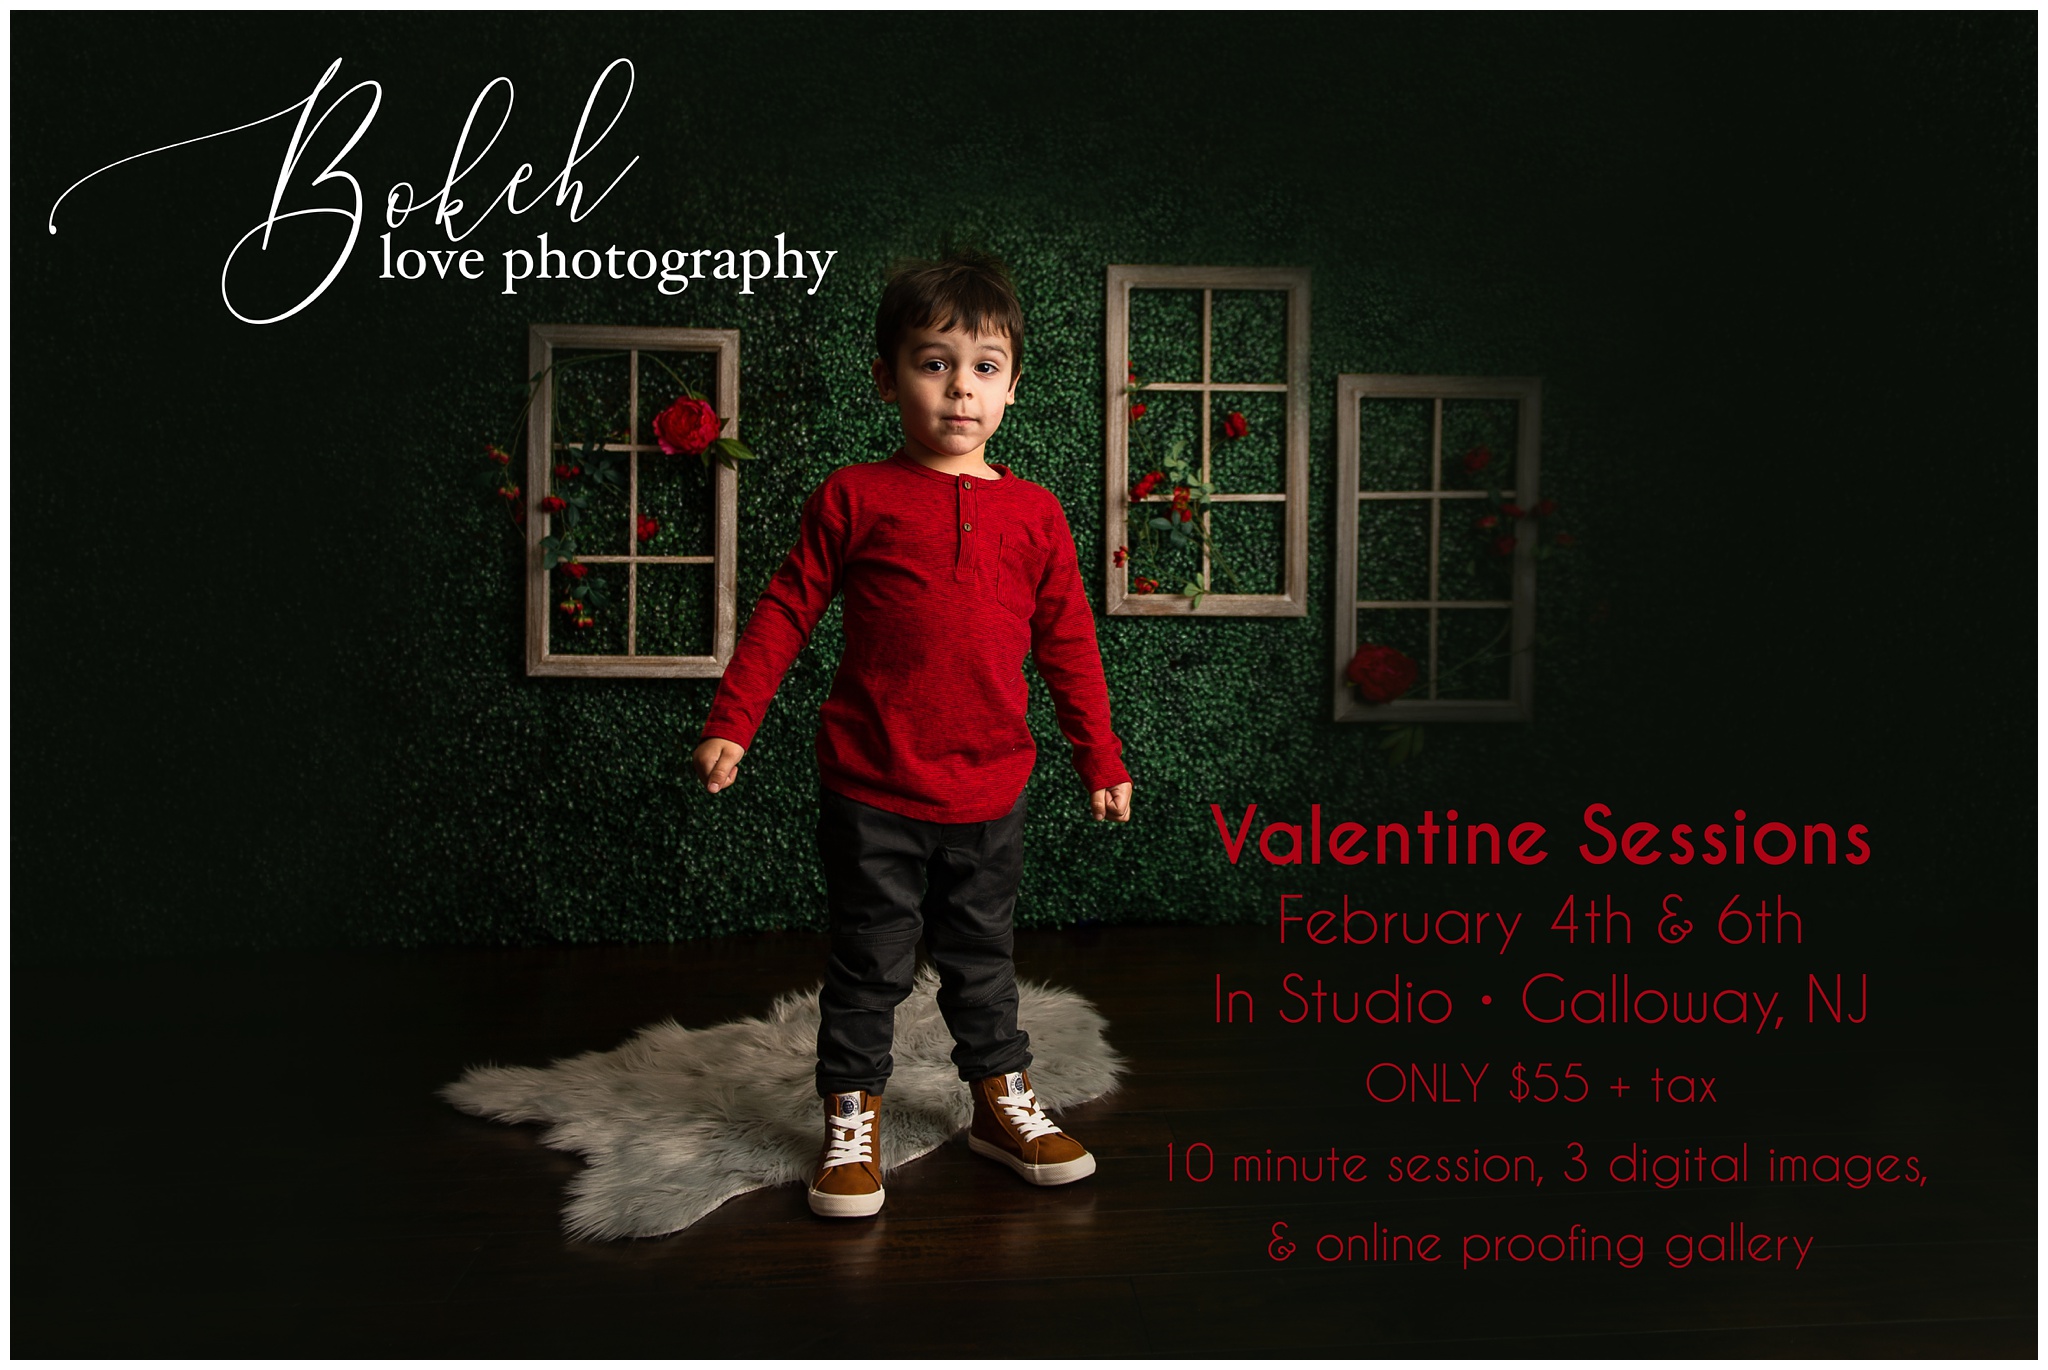 Bokeh Love Photography, Valentine Mini Sessions in Galloway NJ